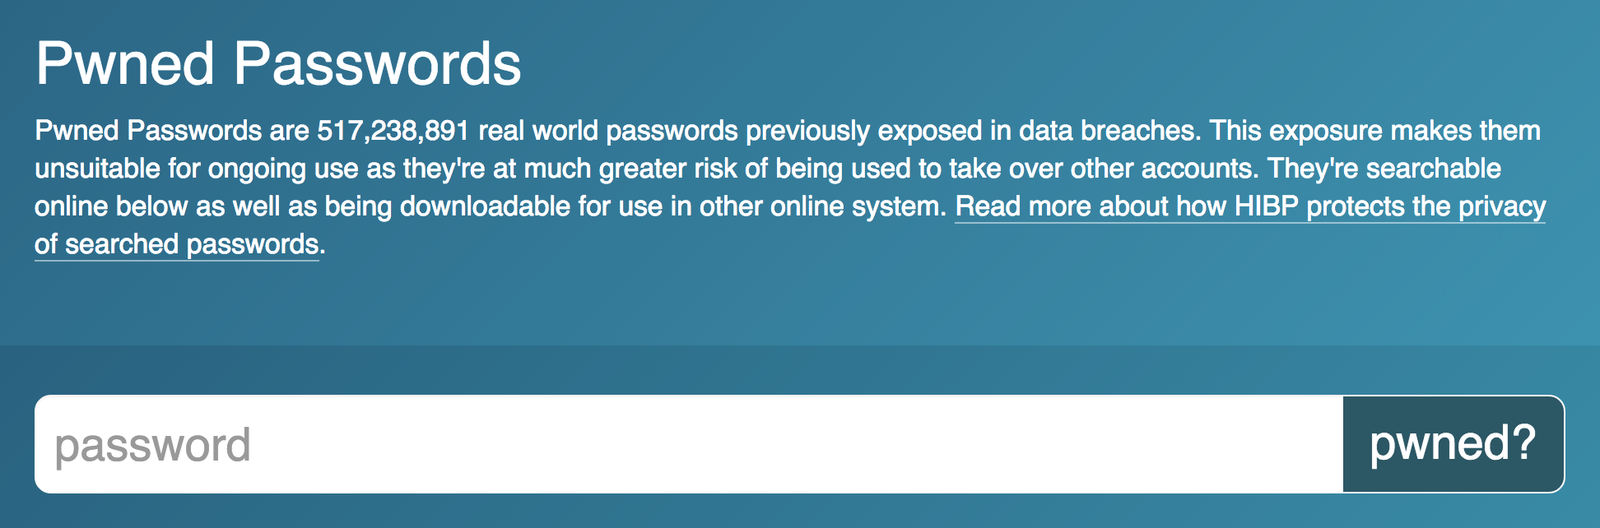 Have i been pwned. Check password. Why your password is. Previous password. World password